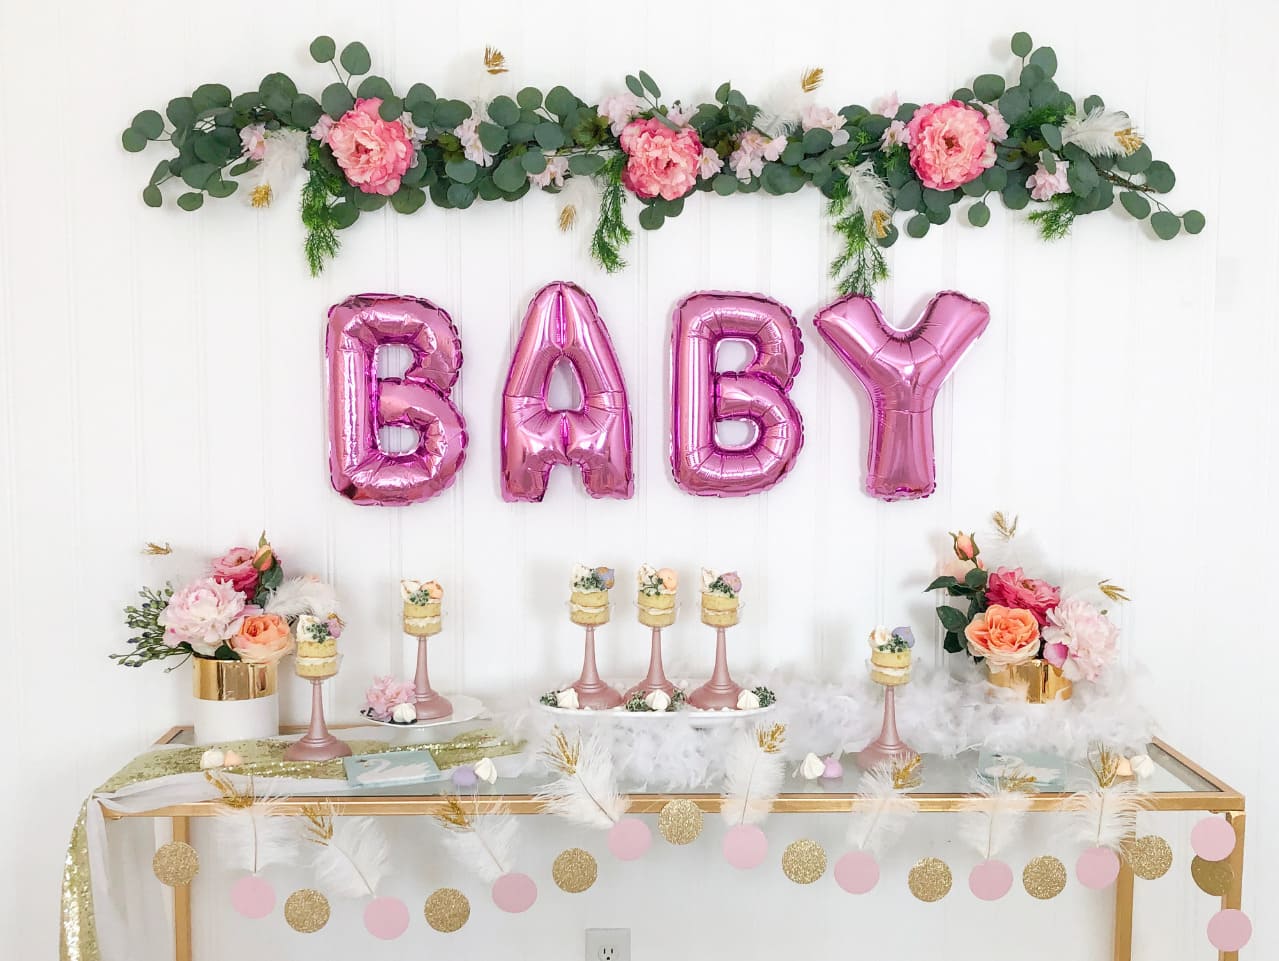 Easy-To-Make Gold-Dipped Feathered Garland Idea For Baby Shower Decoration